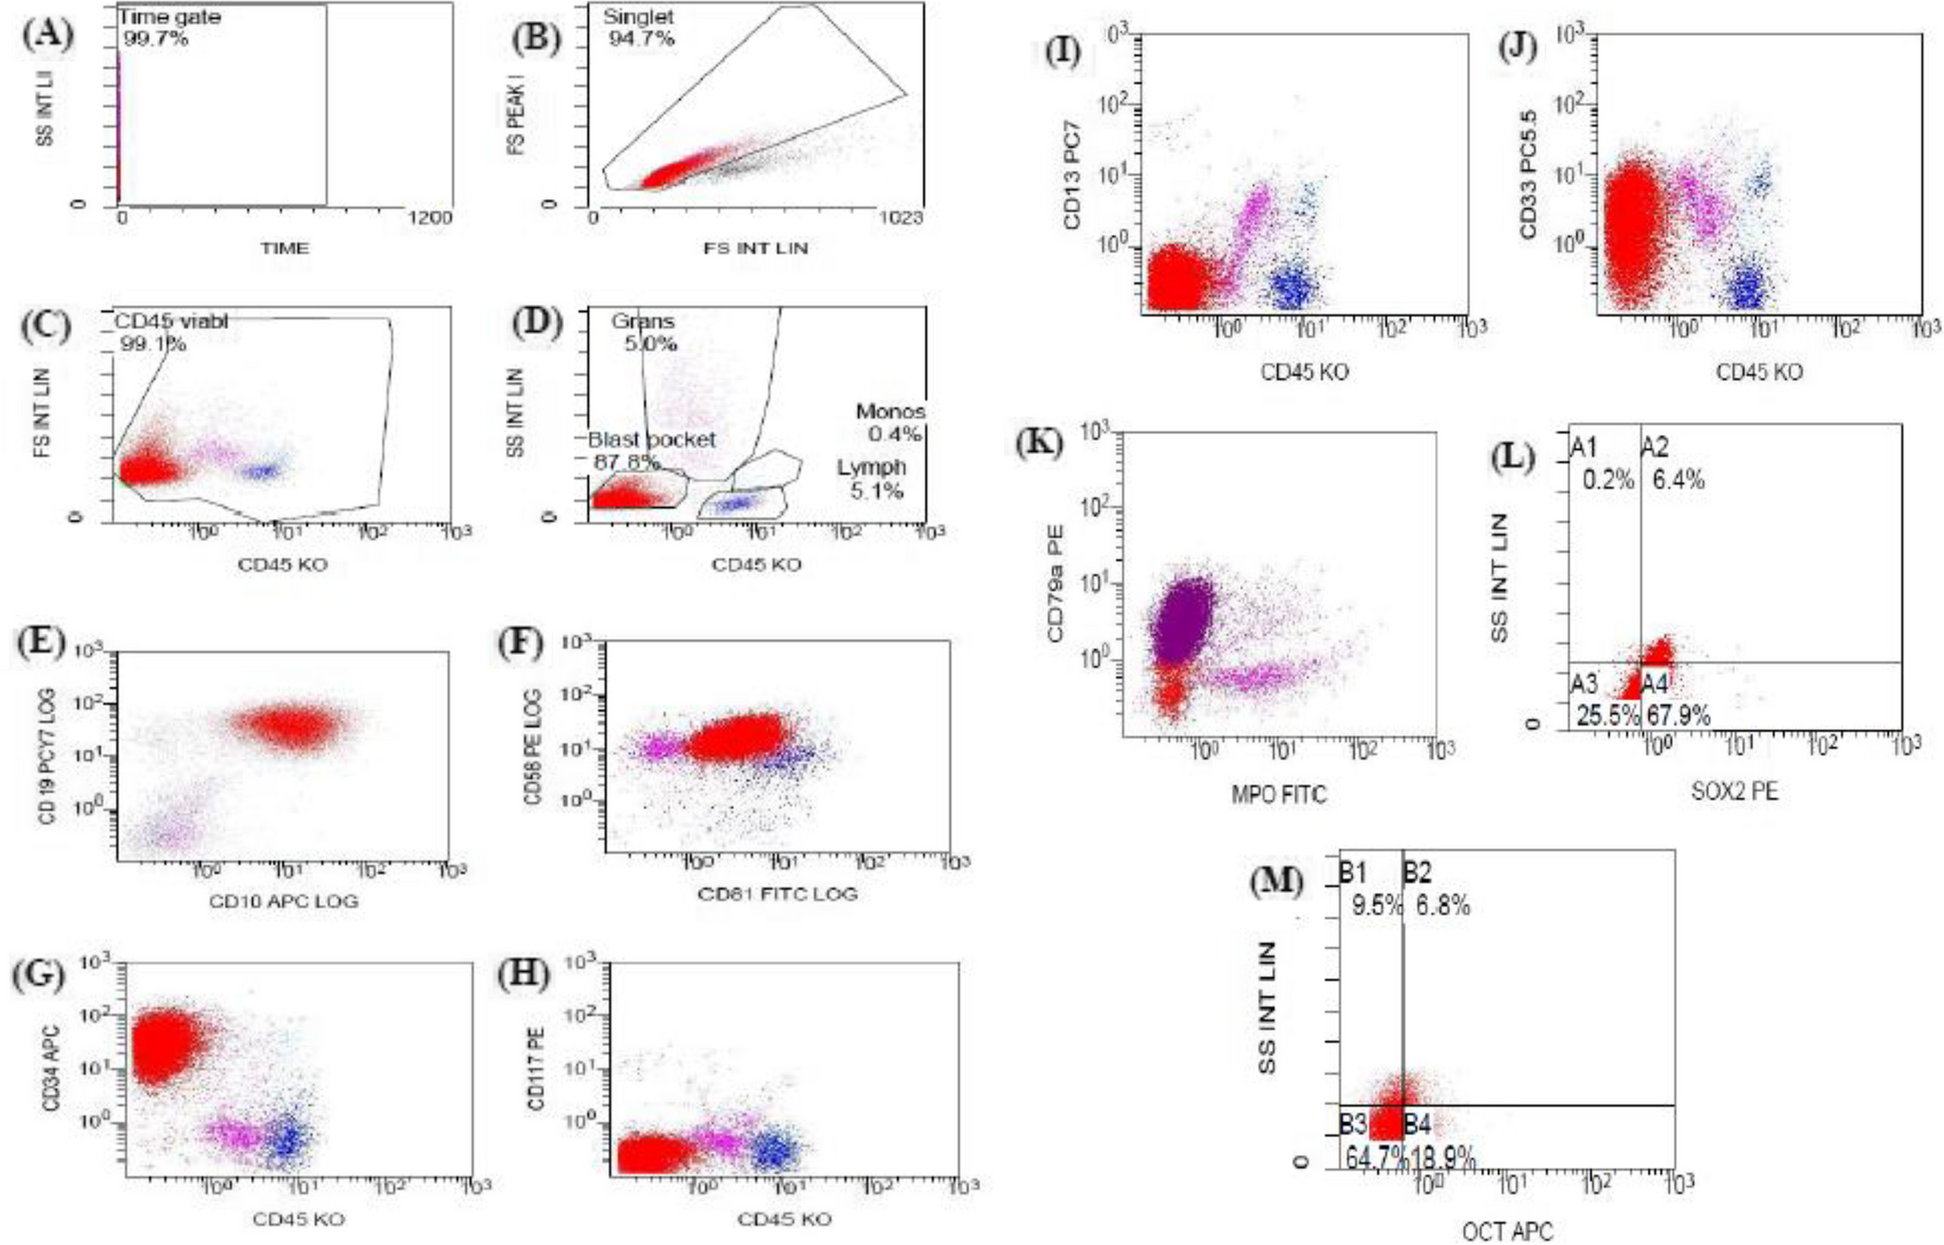 Significance of OCT3/4 and SOX2 antigens expression by leukemic blast cells in adult acute leukemia